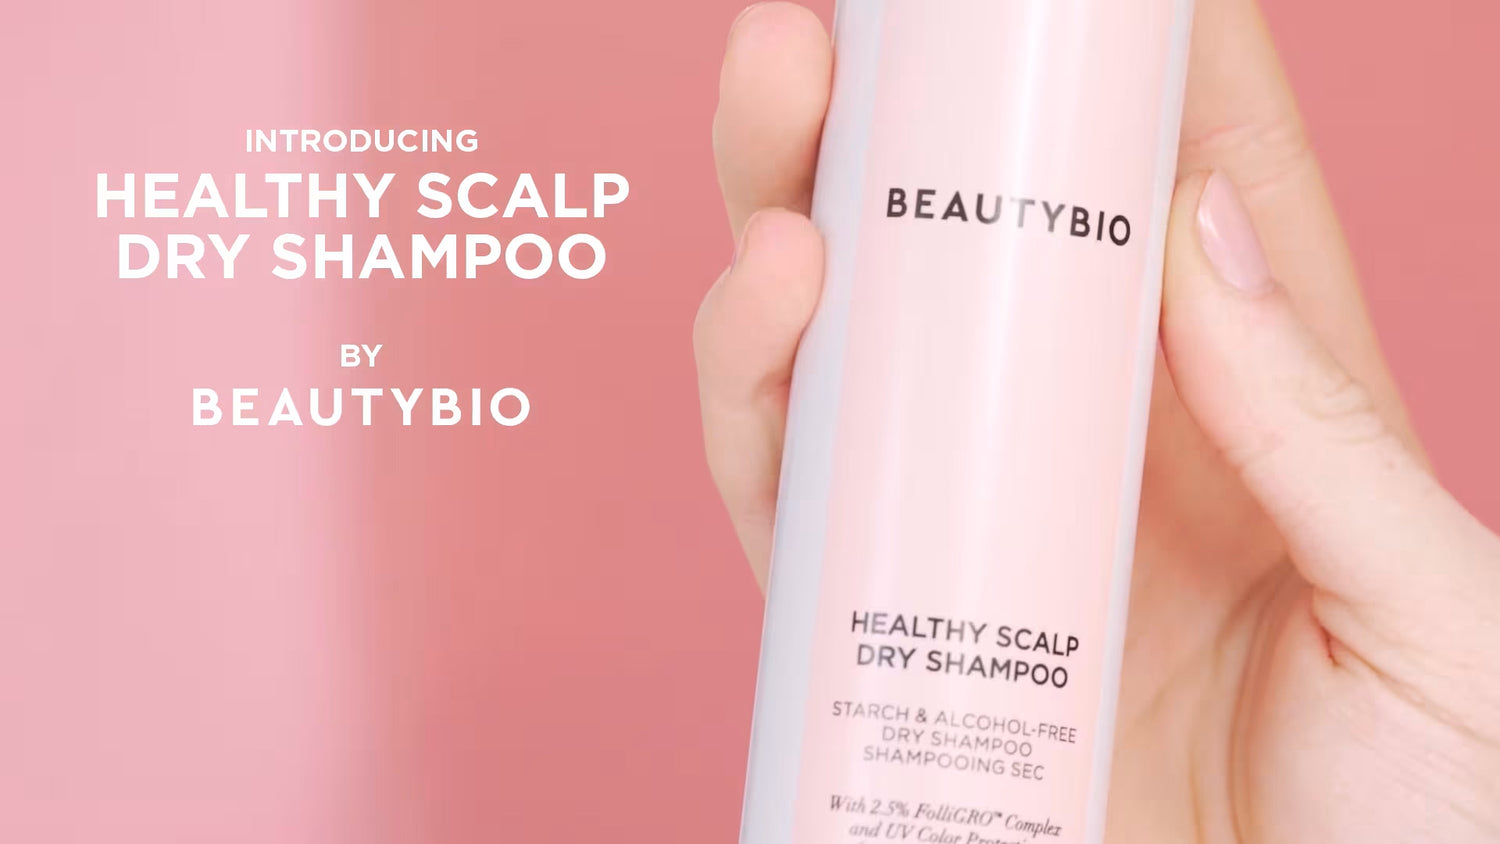 Introducing Healthy Scalp Dry Shampoo By BeautyBio